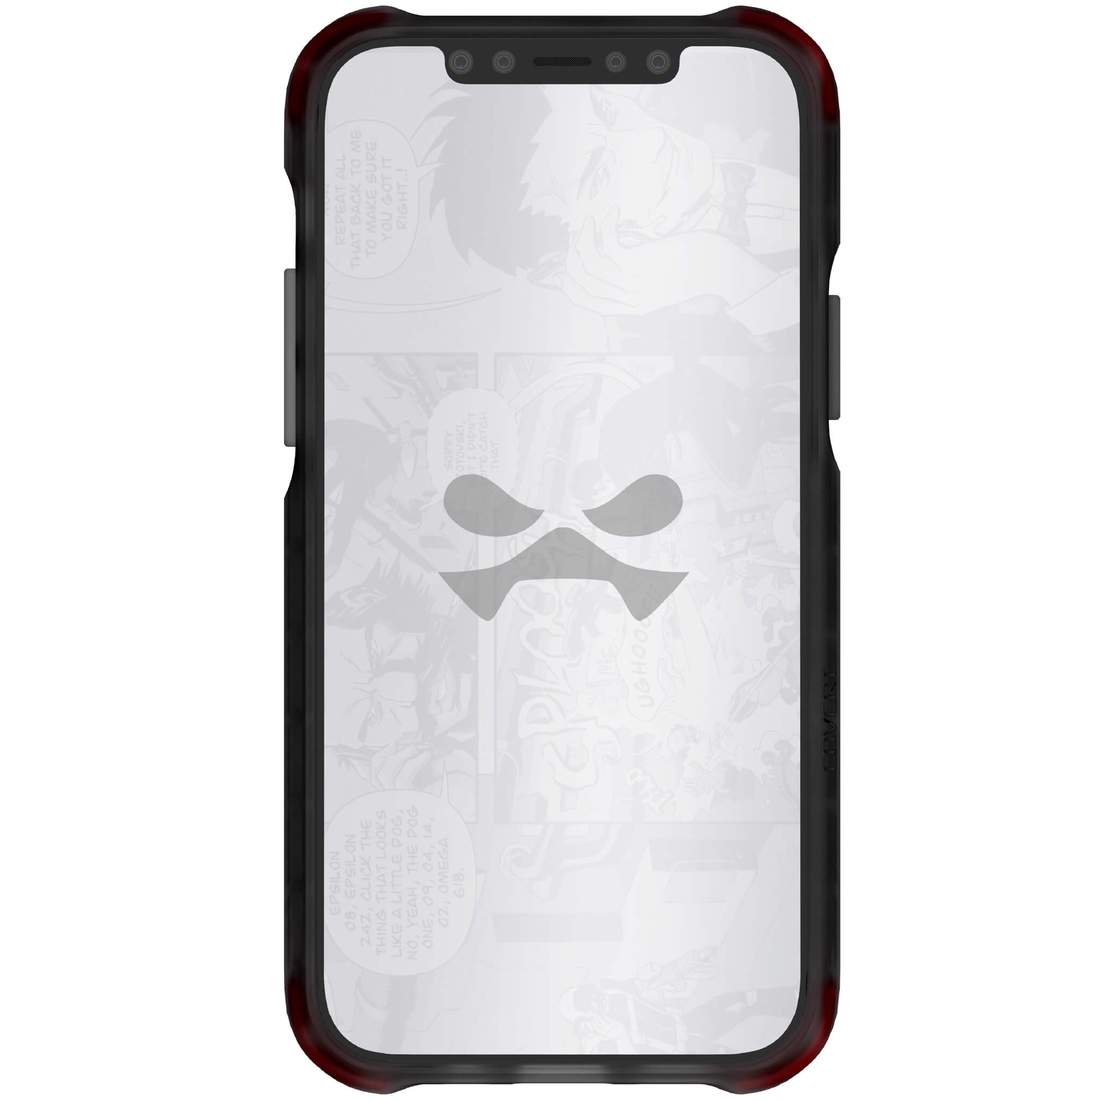 Ghostek Covert 4 Case for iPhone 12 Pro Max (Smoke)